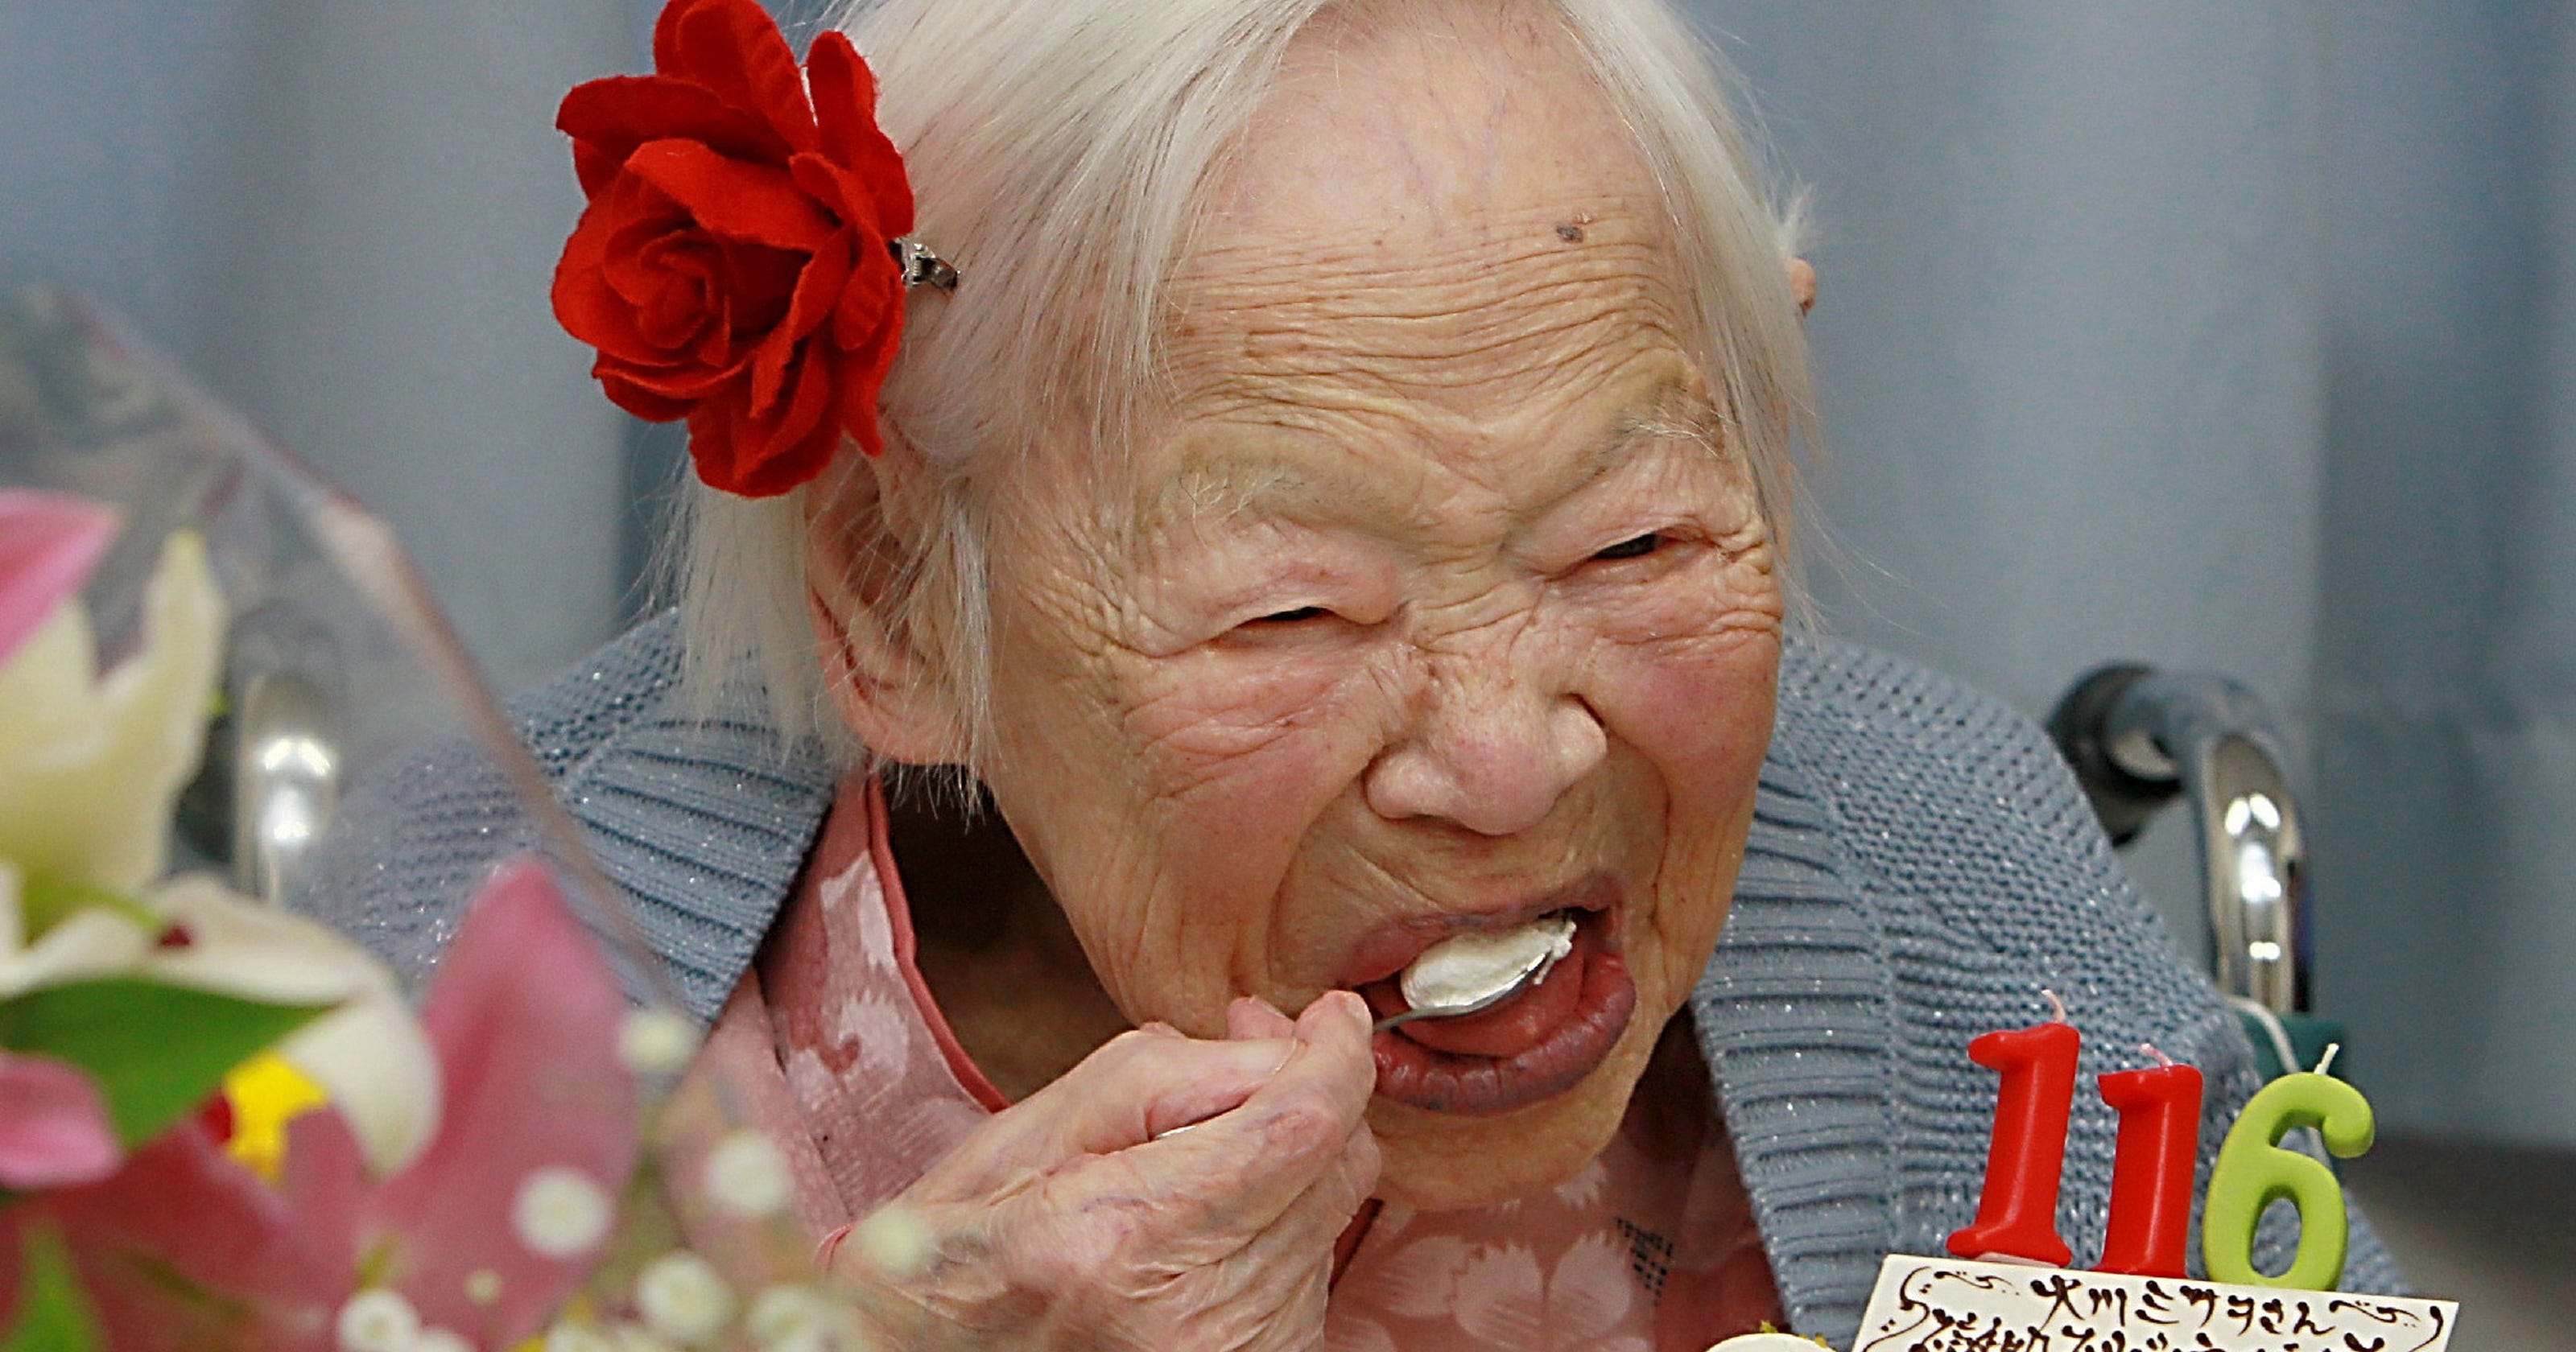 Oldest Living Person Celebrates Her 116th Birthday